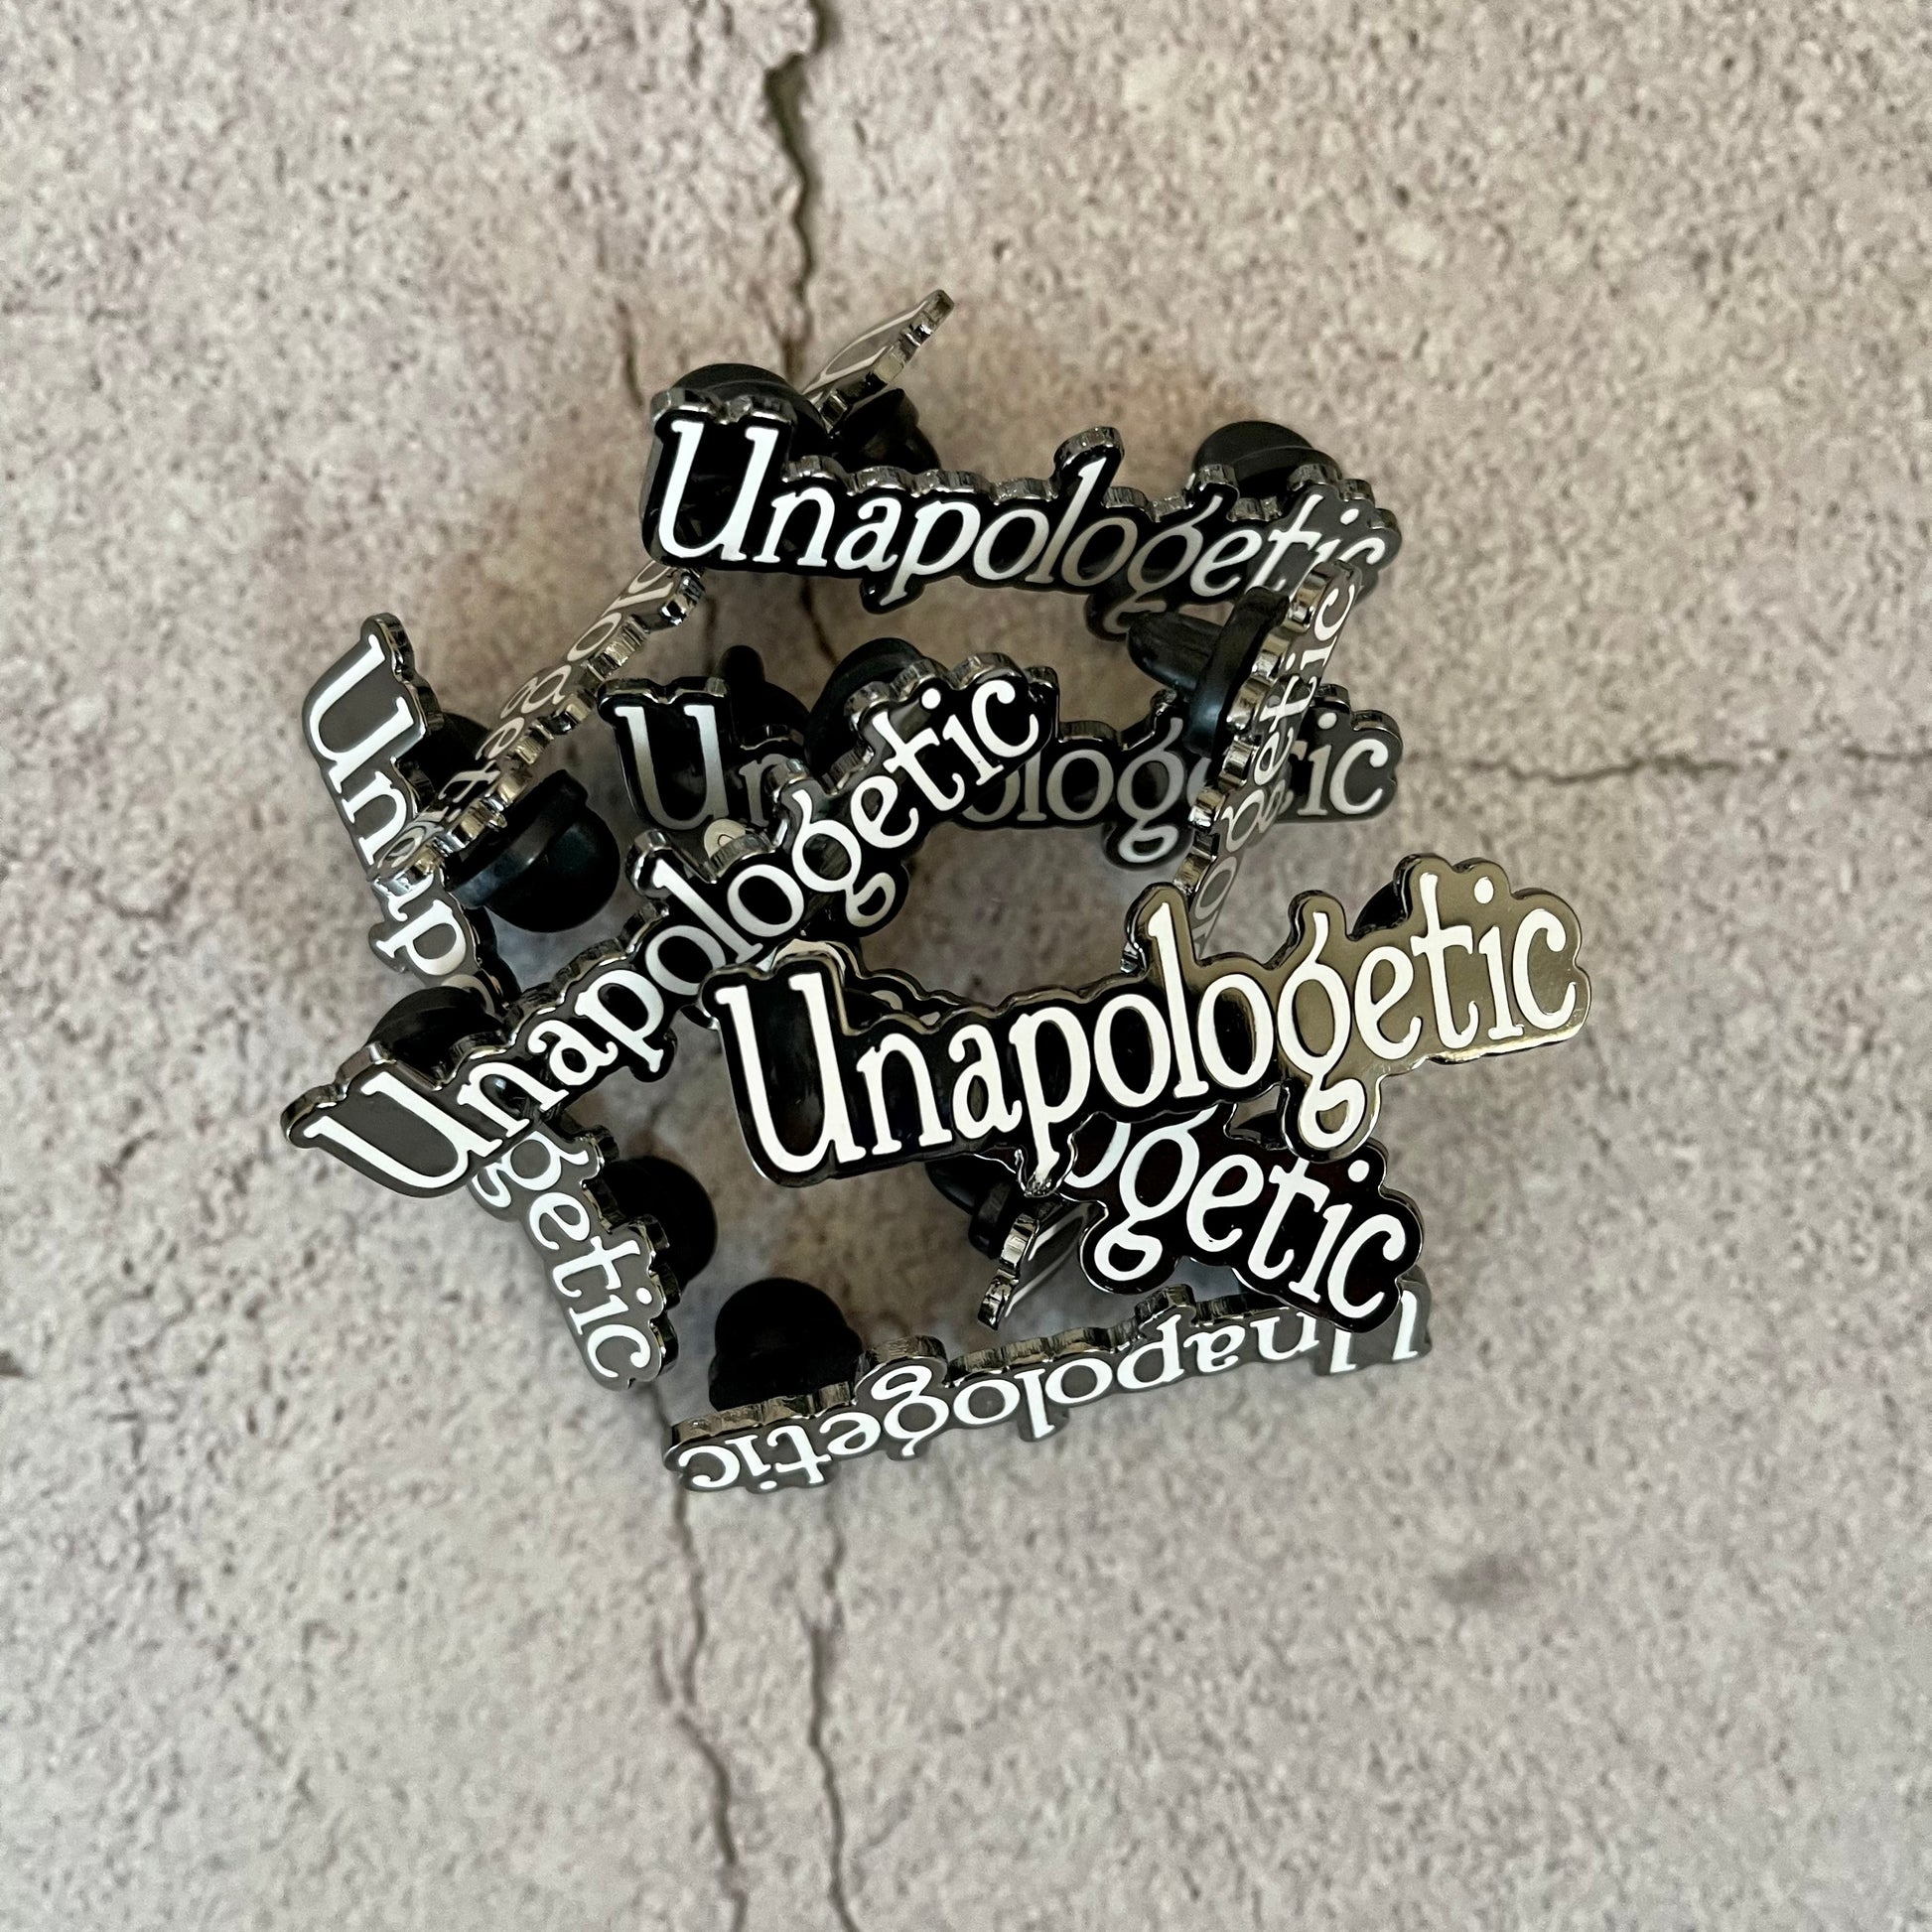 Hard Enamel Pin that says "Unapologetic"